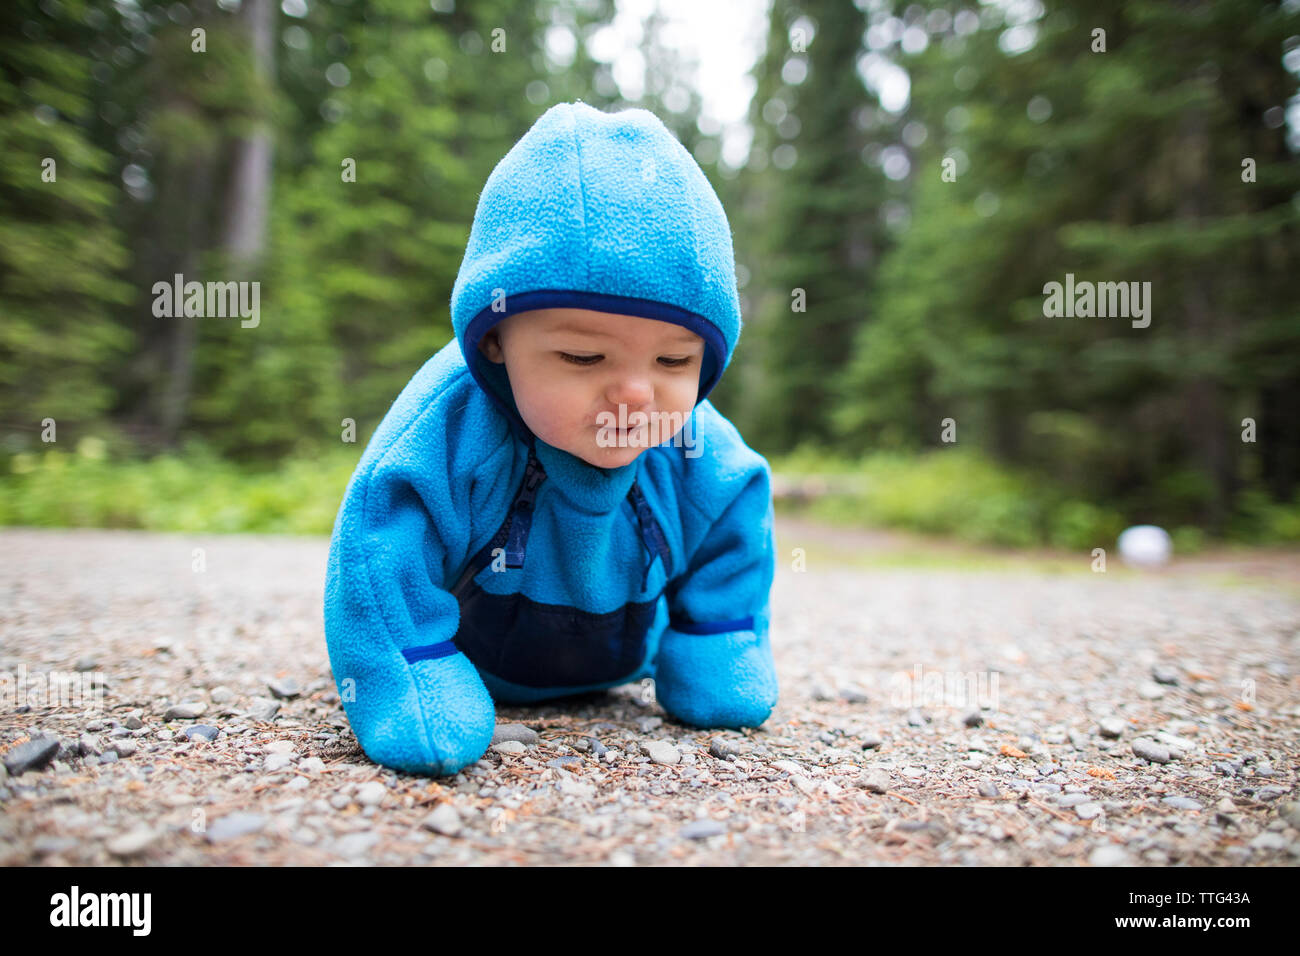 Toddler in blue fleece suit crawling outdoors Stock Photo